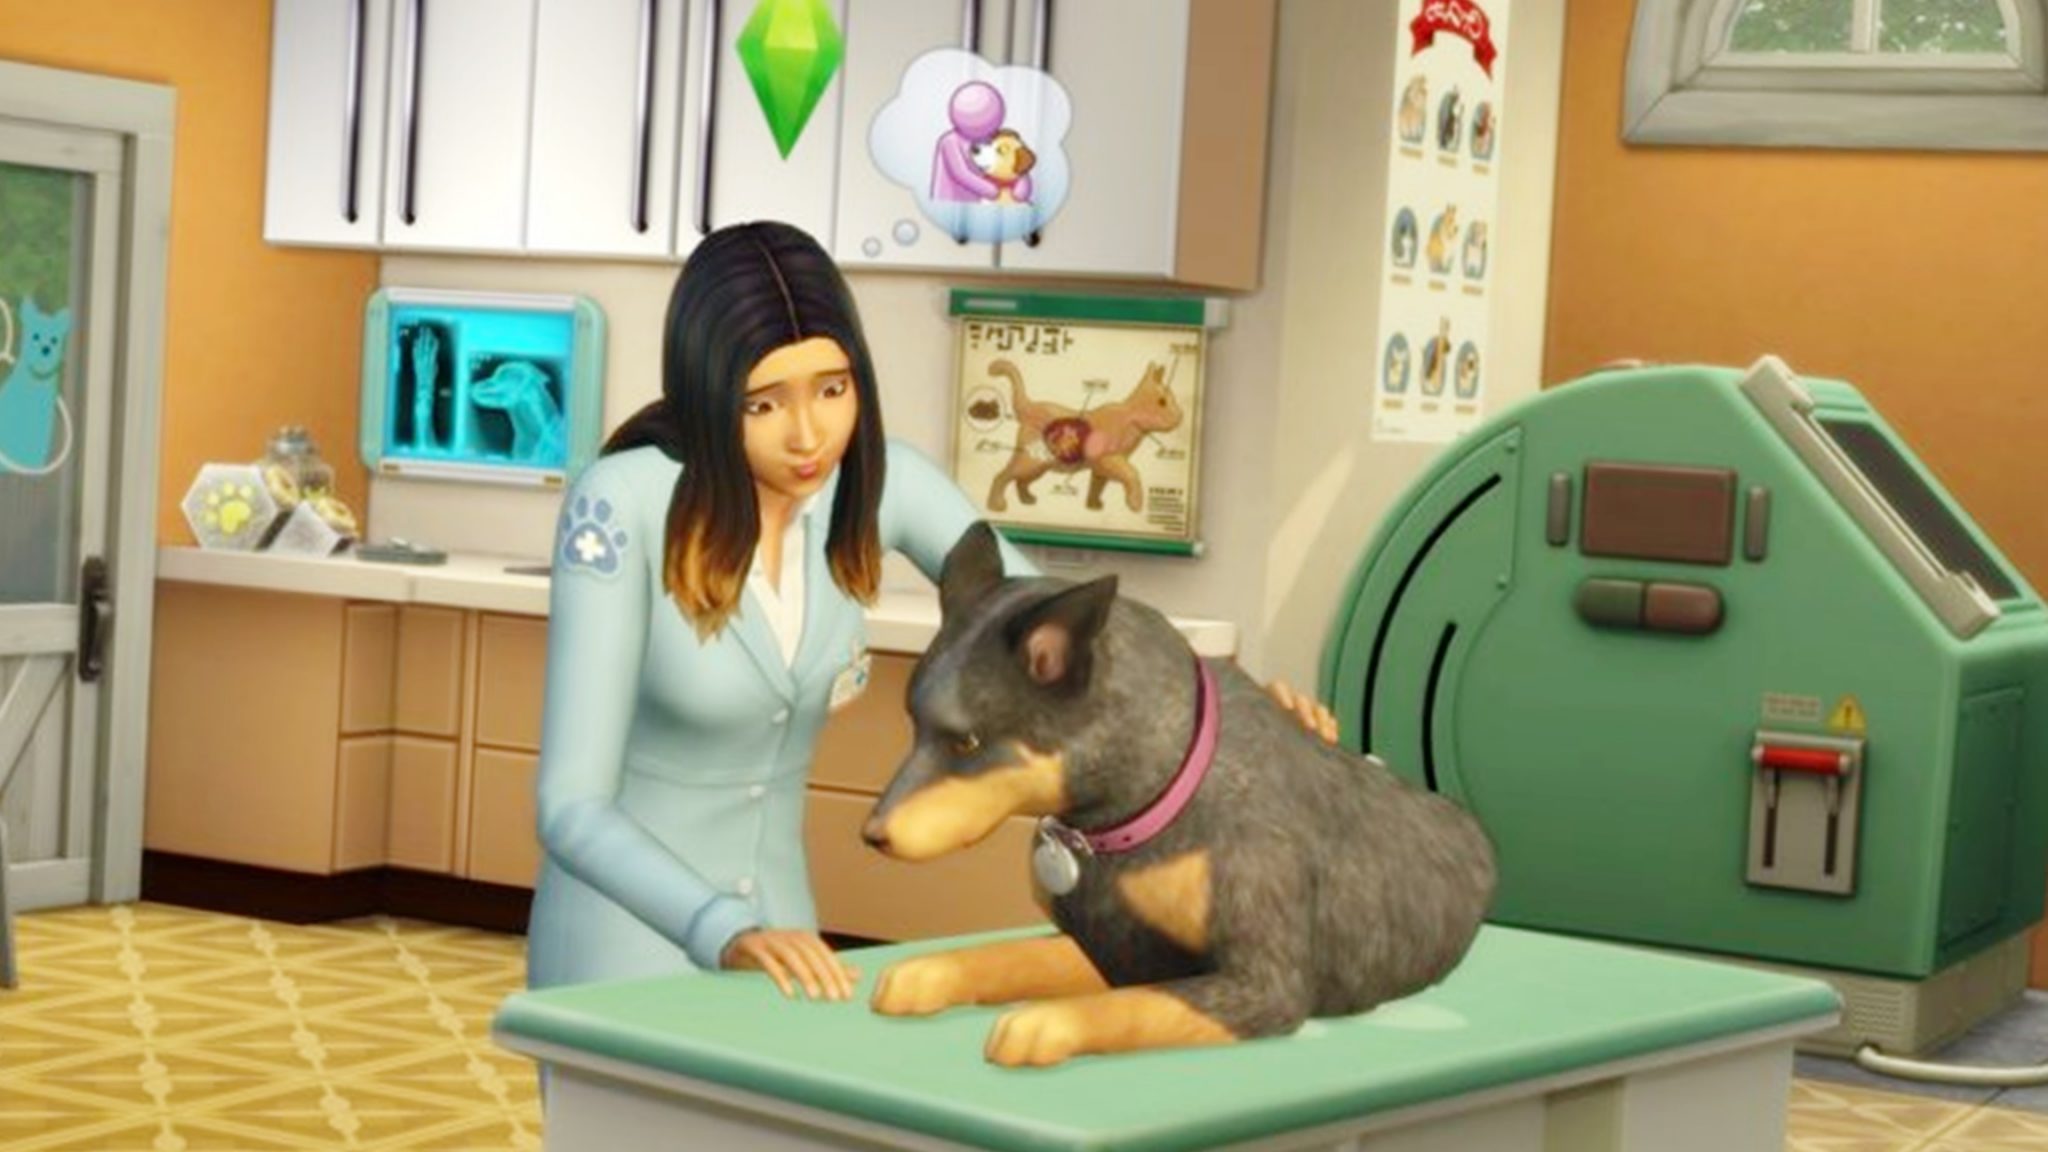 the sims 4 cats and dogs get a pet